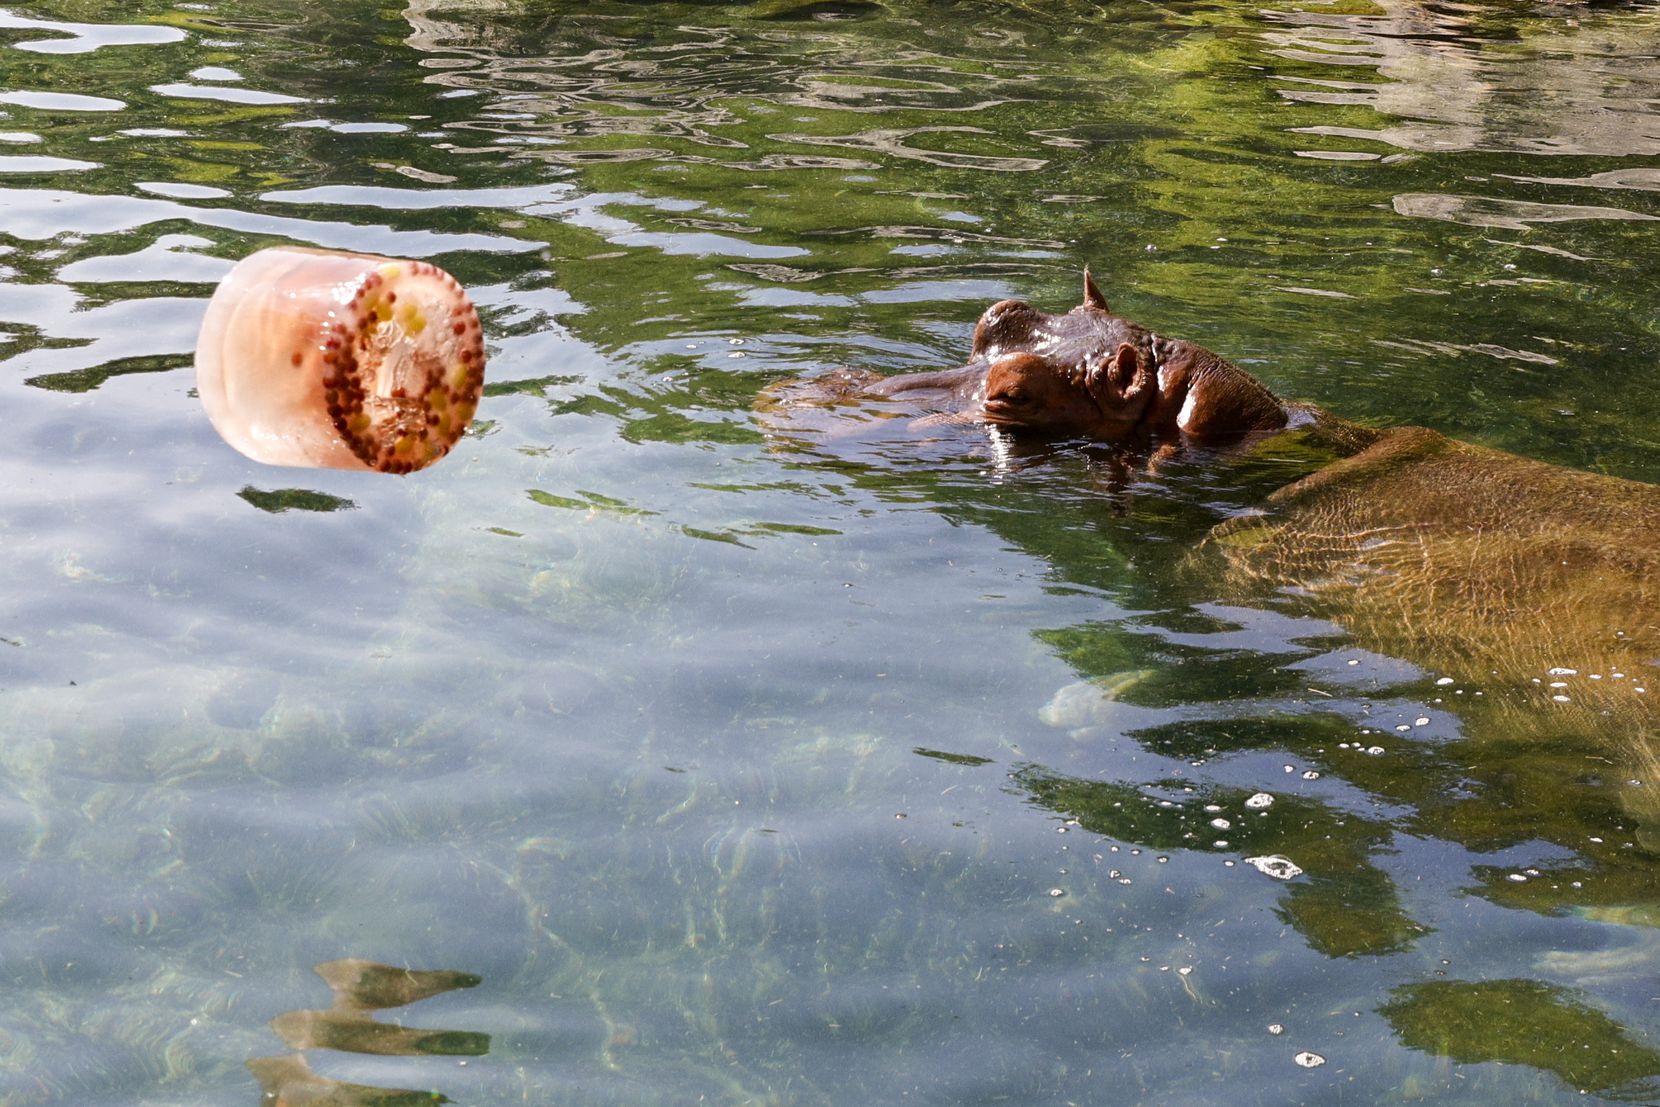 A hippo watched as an ice treat with grapes and Gatorade was thrown into the water at the...